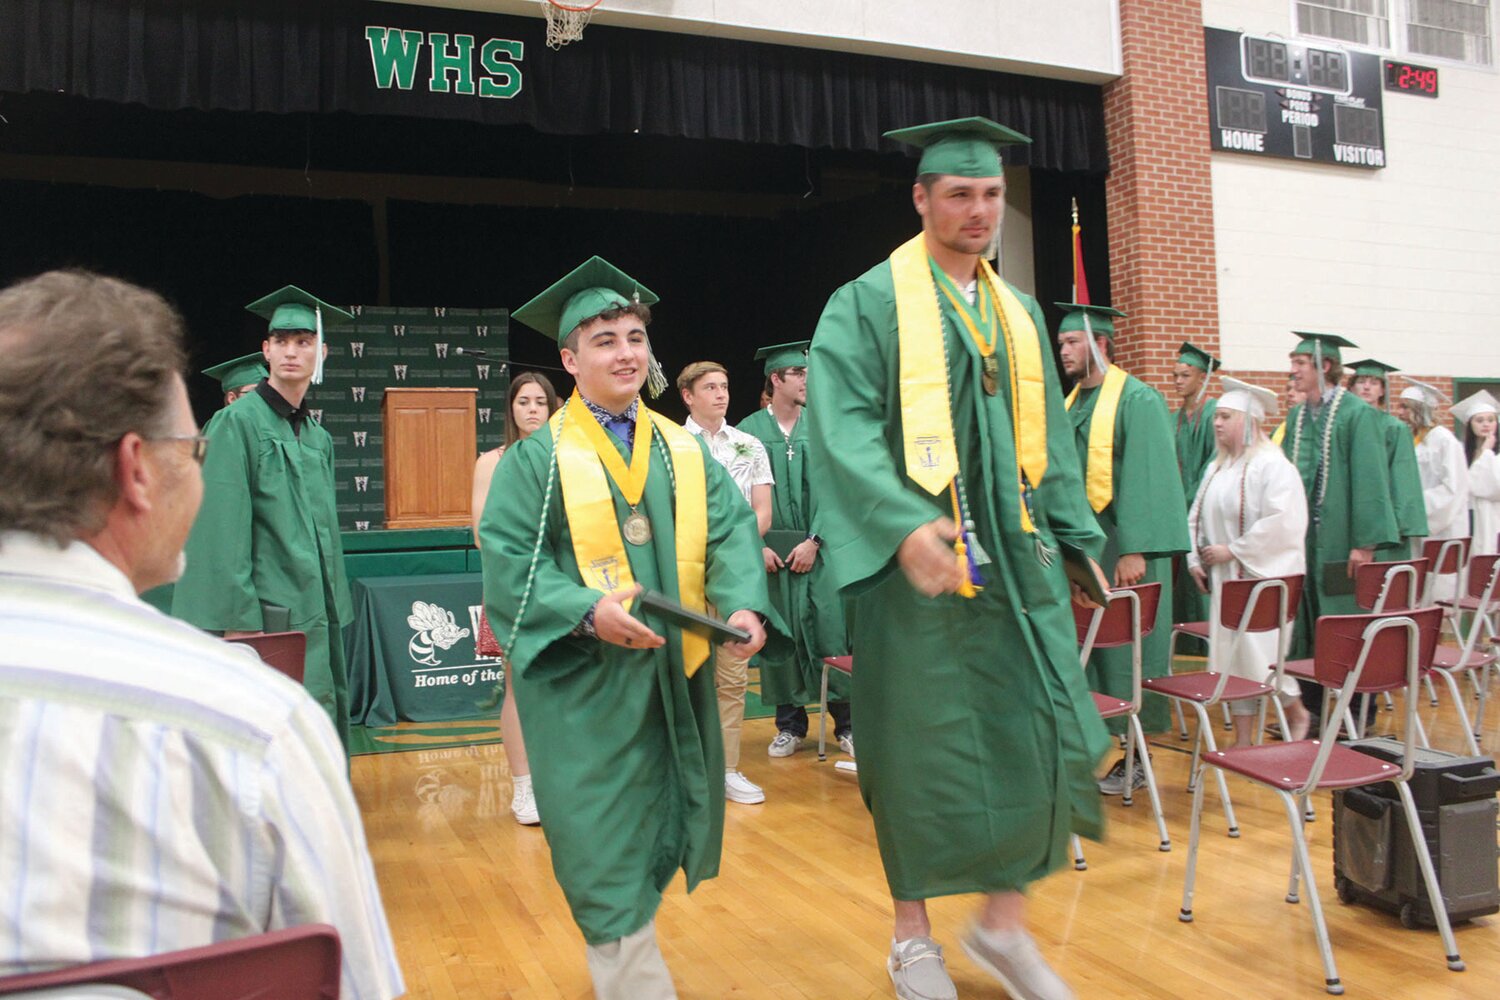 New graduates Brayden Sexton and Langden Kitchen walk together during the Westran High School commencement recessional May 14. The next time they walk through this gym, it will be as alumni.